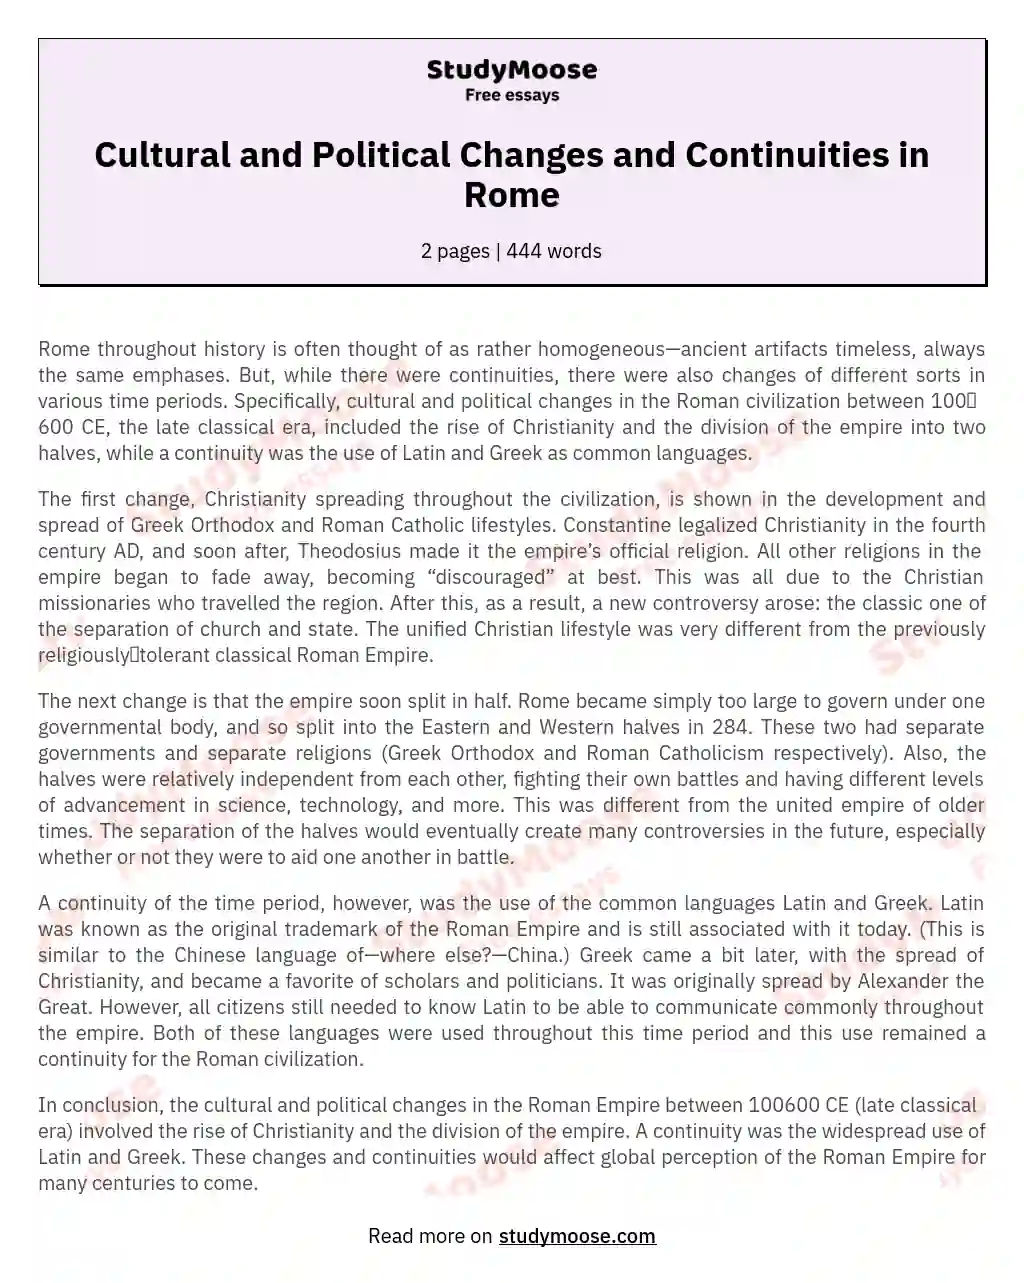 Cultural and Political Changes and Continuities in Rome essay